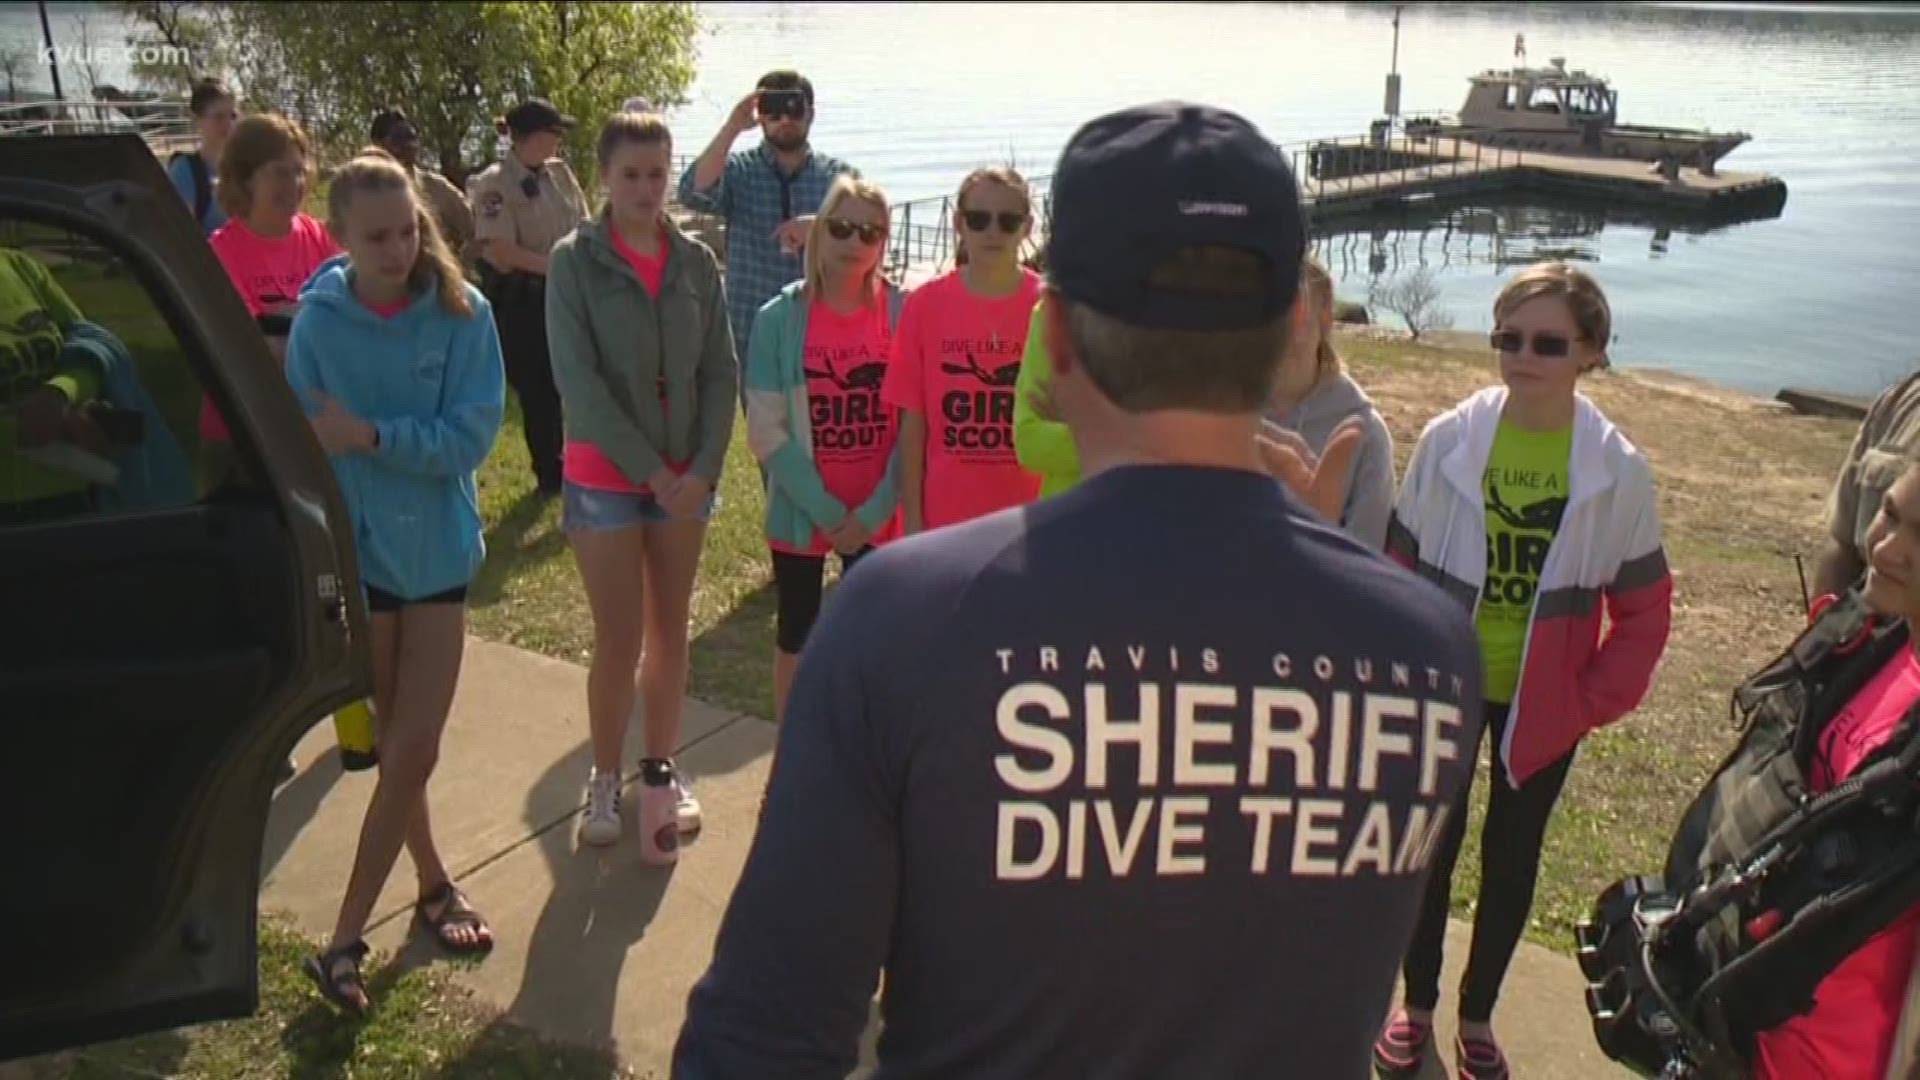 The Travis County Sheriff's Office dive team went above and beyond to say thanks to a local Girl Scout troop after the scouts gave them a delicious gift.